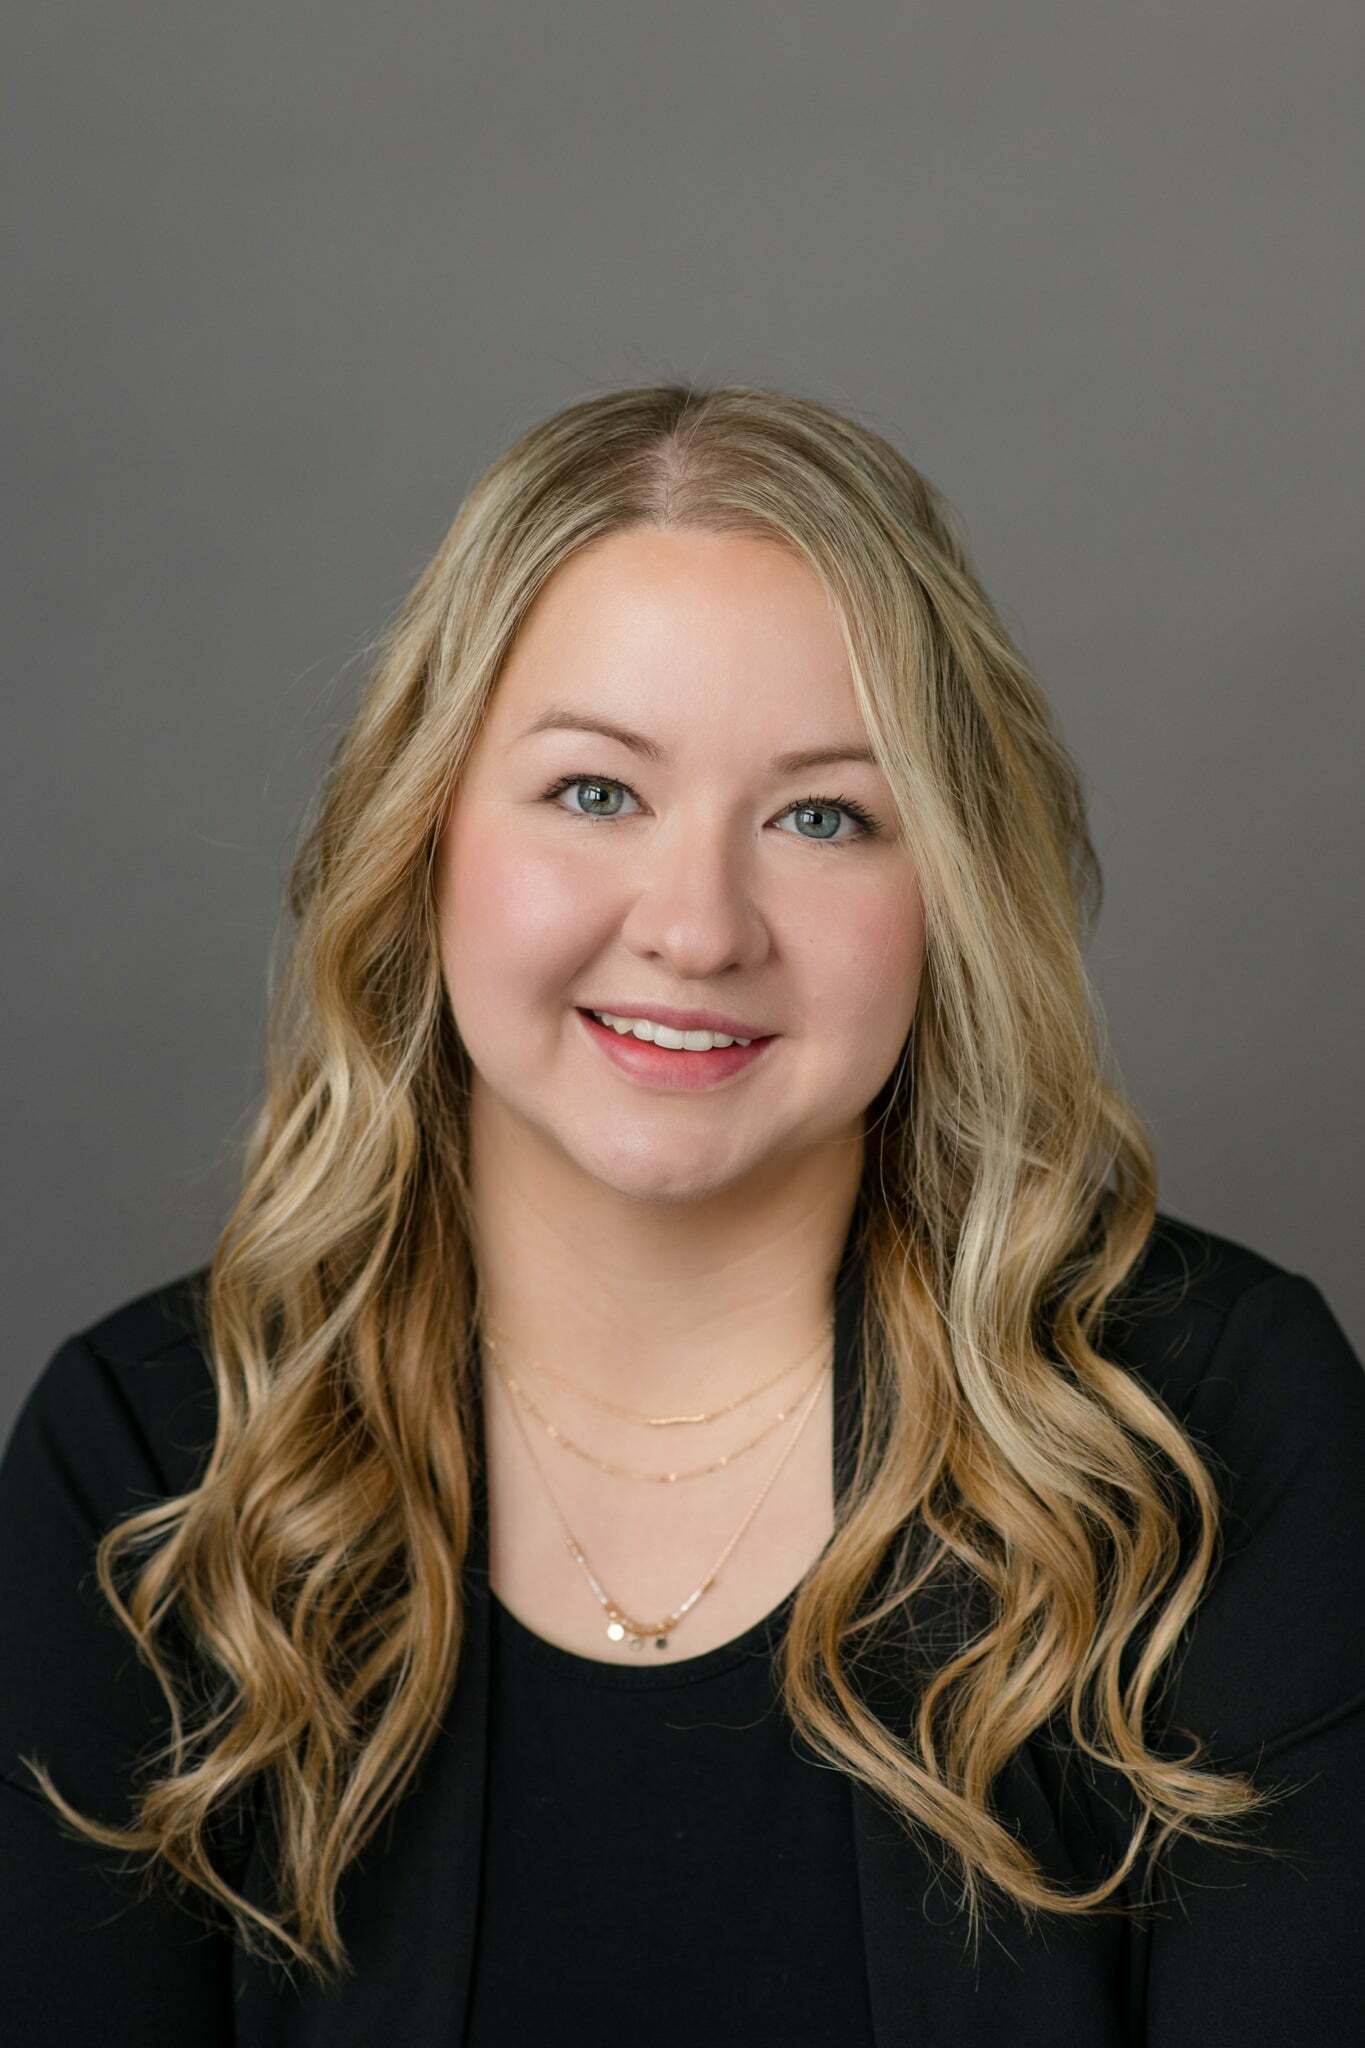 Nicole Foster, Real Estate Salesperson in Whitefish, Deaton and Company Real Estate